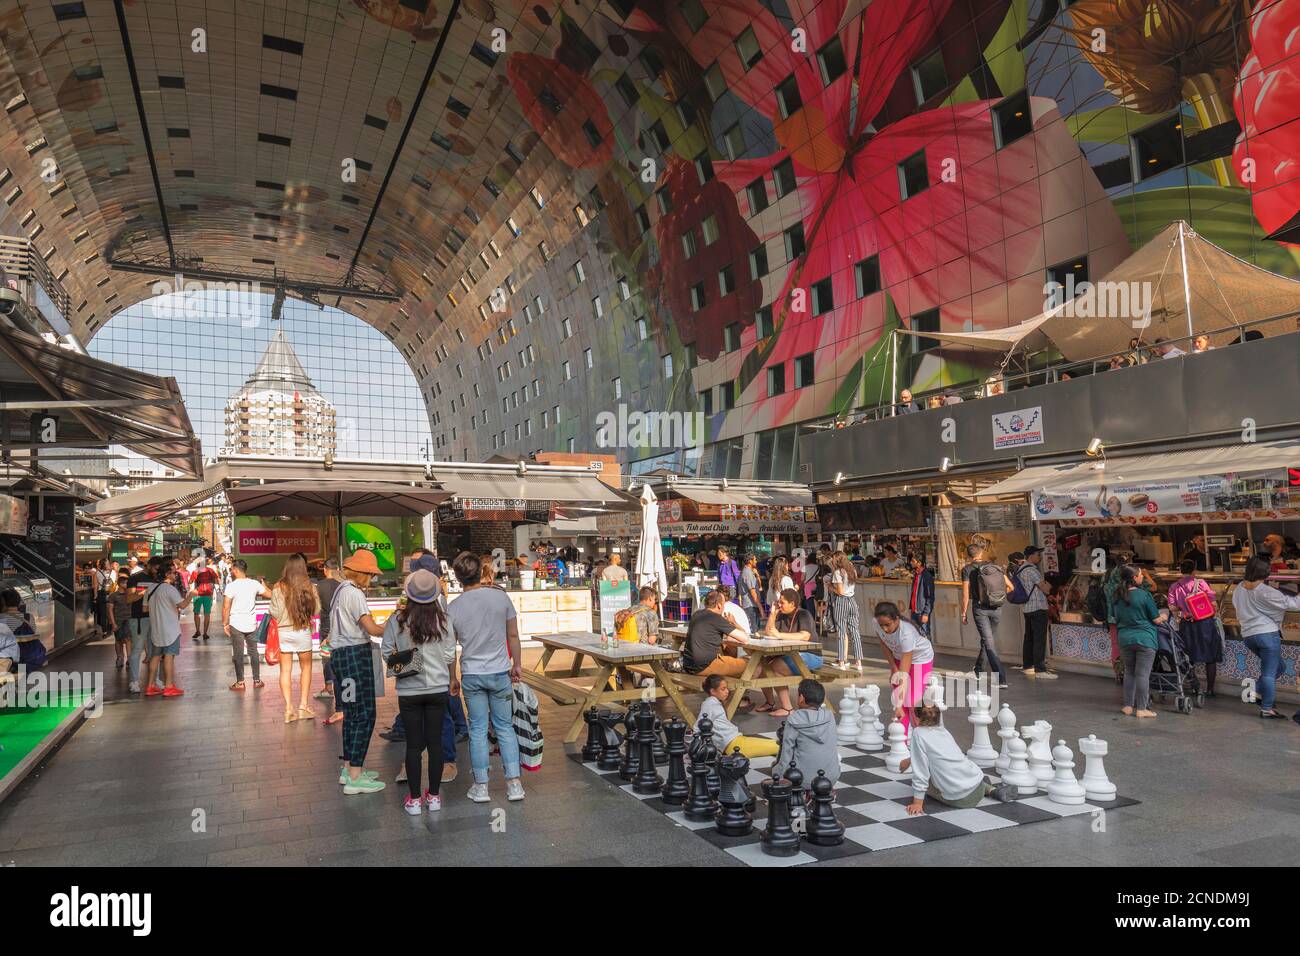 Markthal, New Market Hall, Rotterdam, pays-Bas du Sud, pays-Bas, Europe Banque D'Images